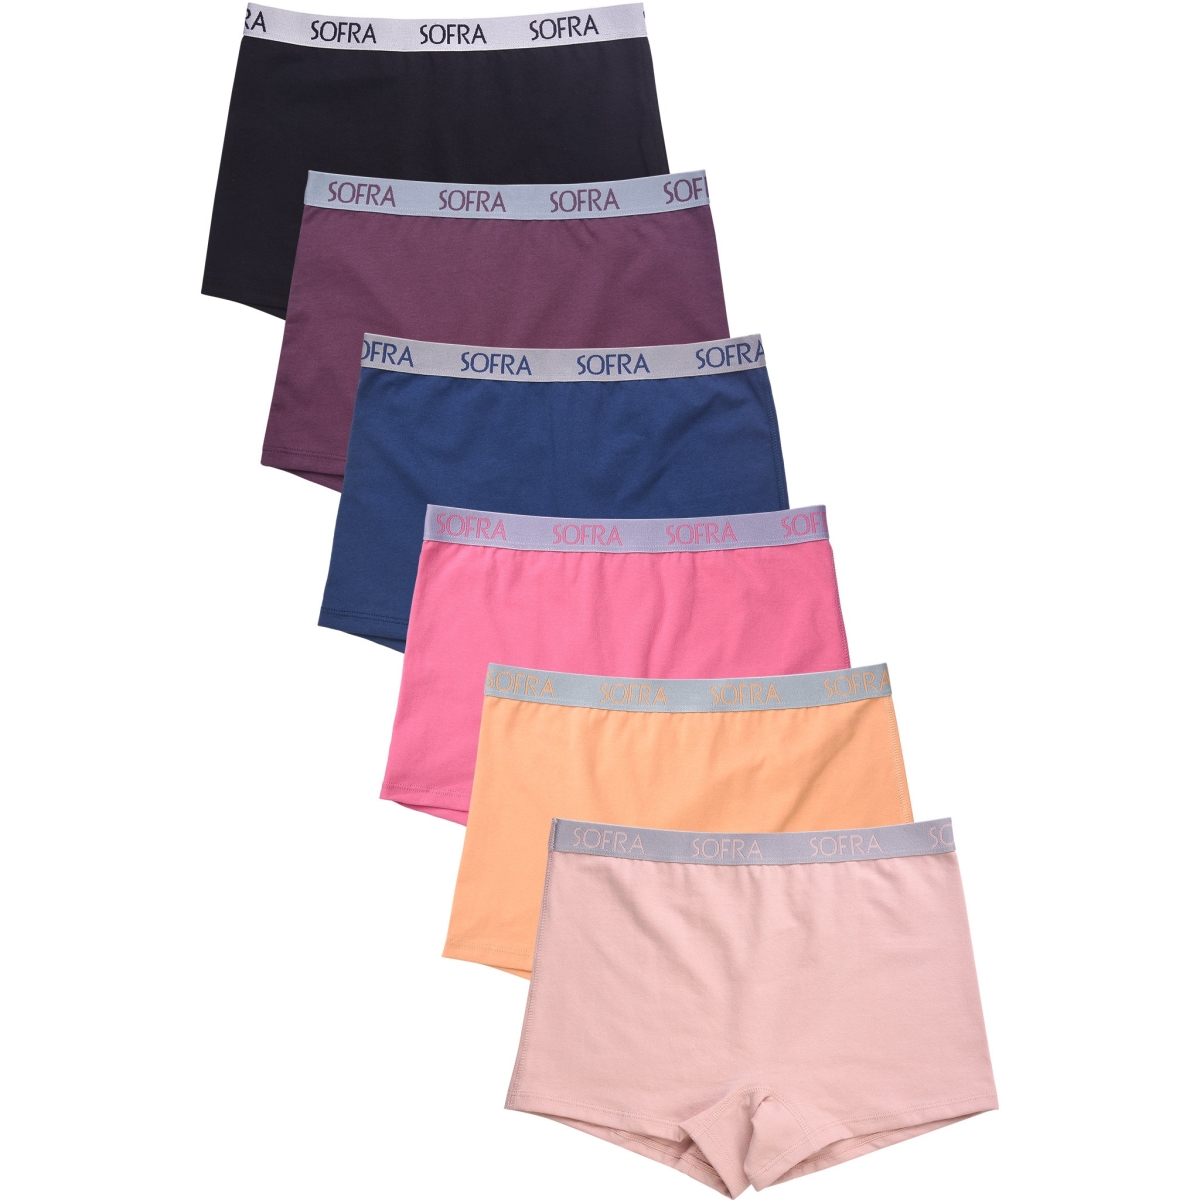 Picture of 247 Frenzy 247-LP1422CB4-MD Sofra Womens Essentials Cotton Stretch Boyshort Panty Underwear - Assorted Color - Medium - Pack of 6